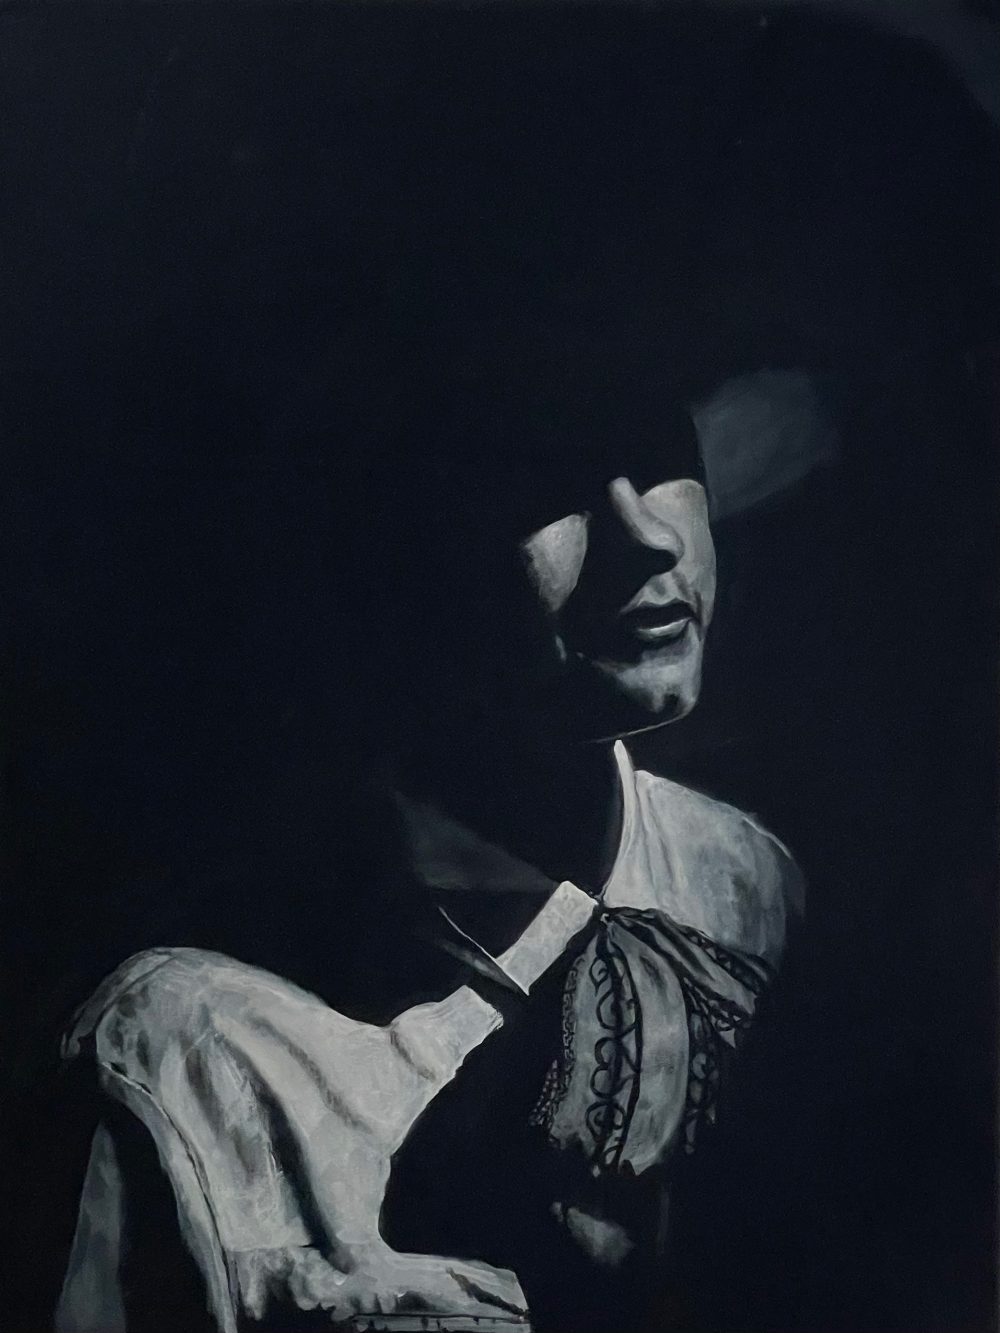 Painting of a man in the traditional Mexican Charro attire, with shadows cast across his upper body and face.